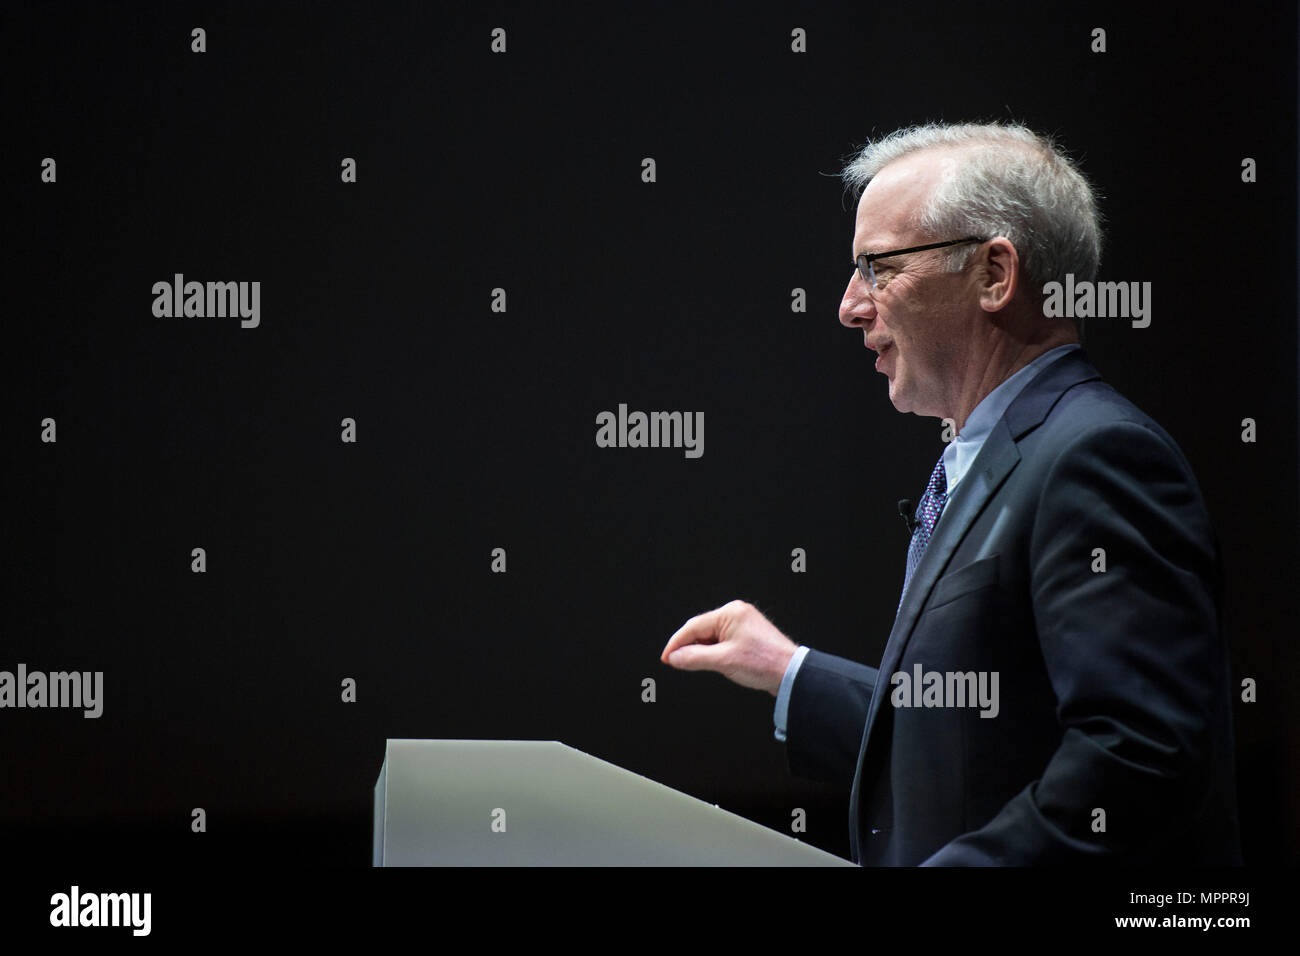 President of the Federal Reserve Bank of New York Bill Dudley speaks during the Bank of England Markets Forum 2018, at Bloomberg, in central London. Stock Photo